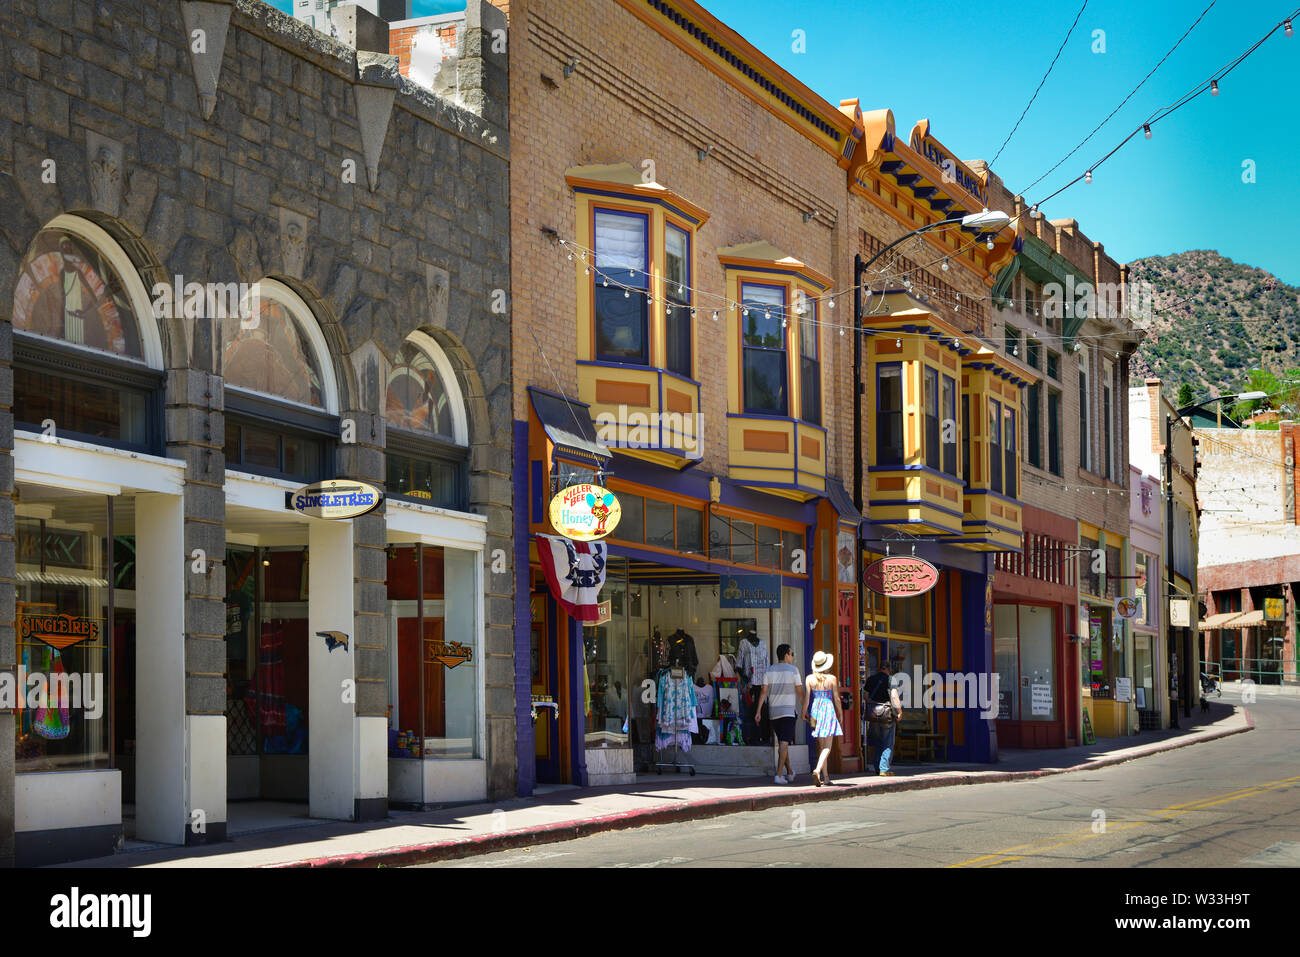 People enjoy the sites, the cafes, and shopping, in the histoic old mining town in classic small town America, Bisbee, AZ, USA Stock Photo